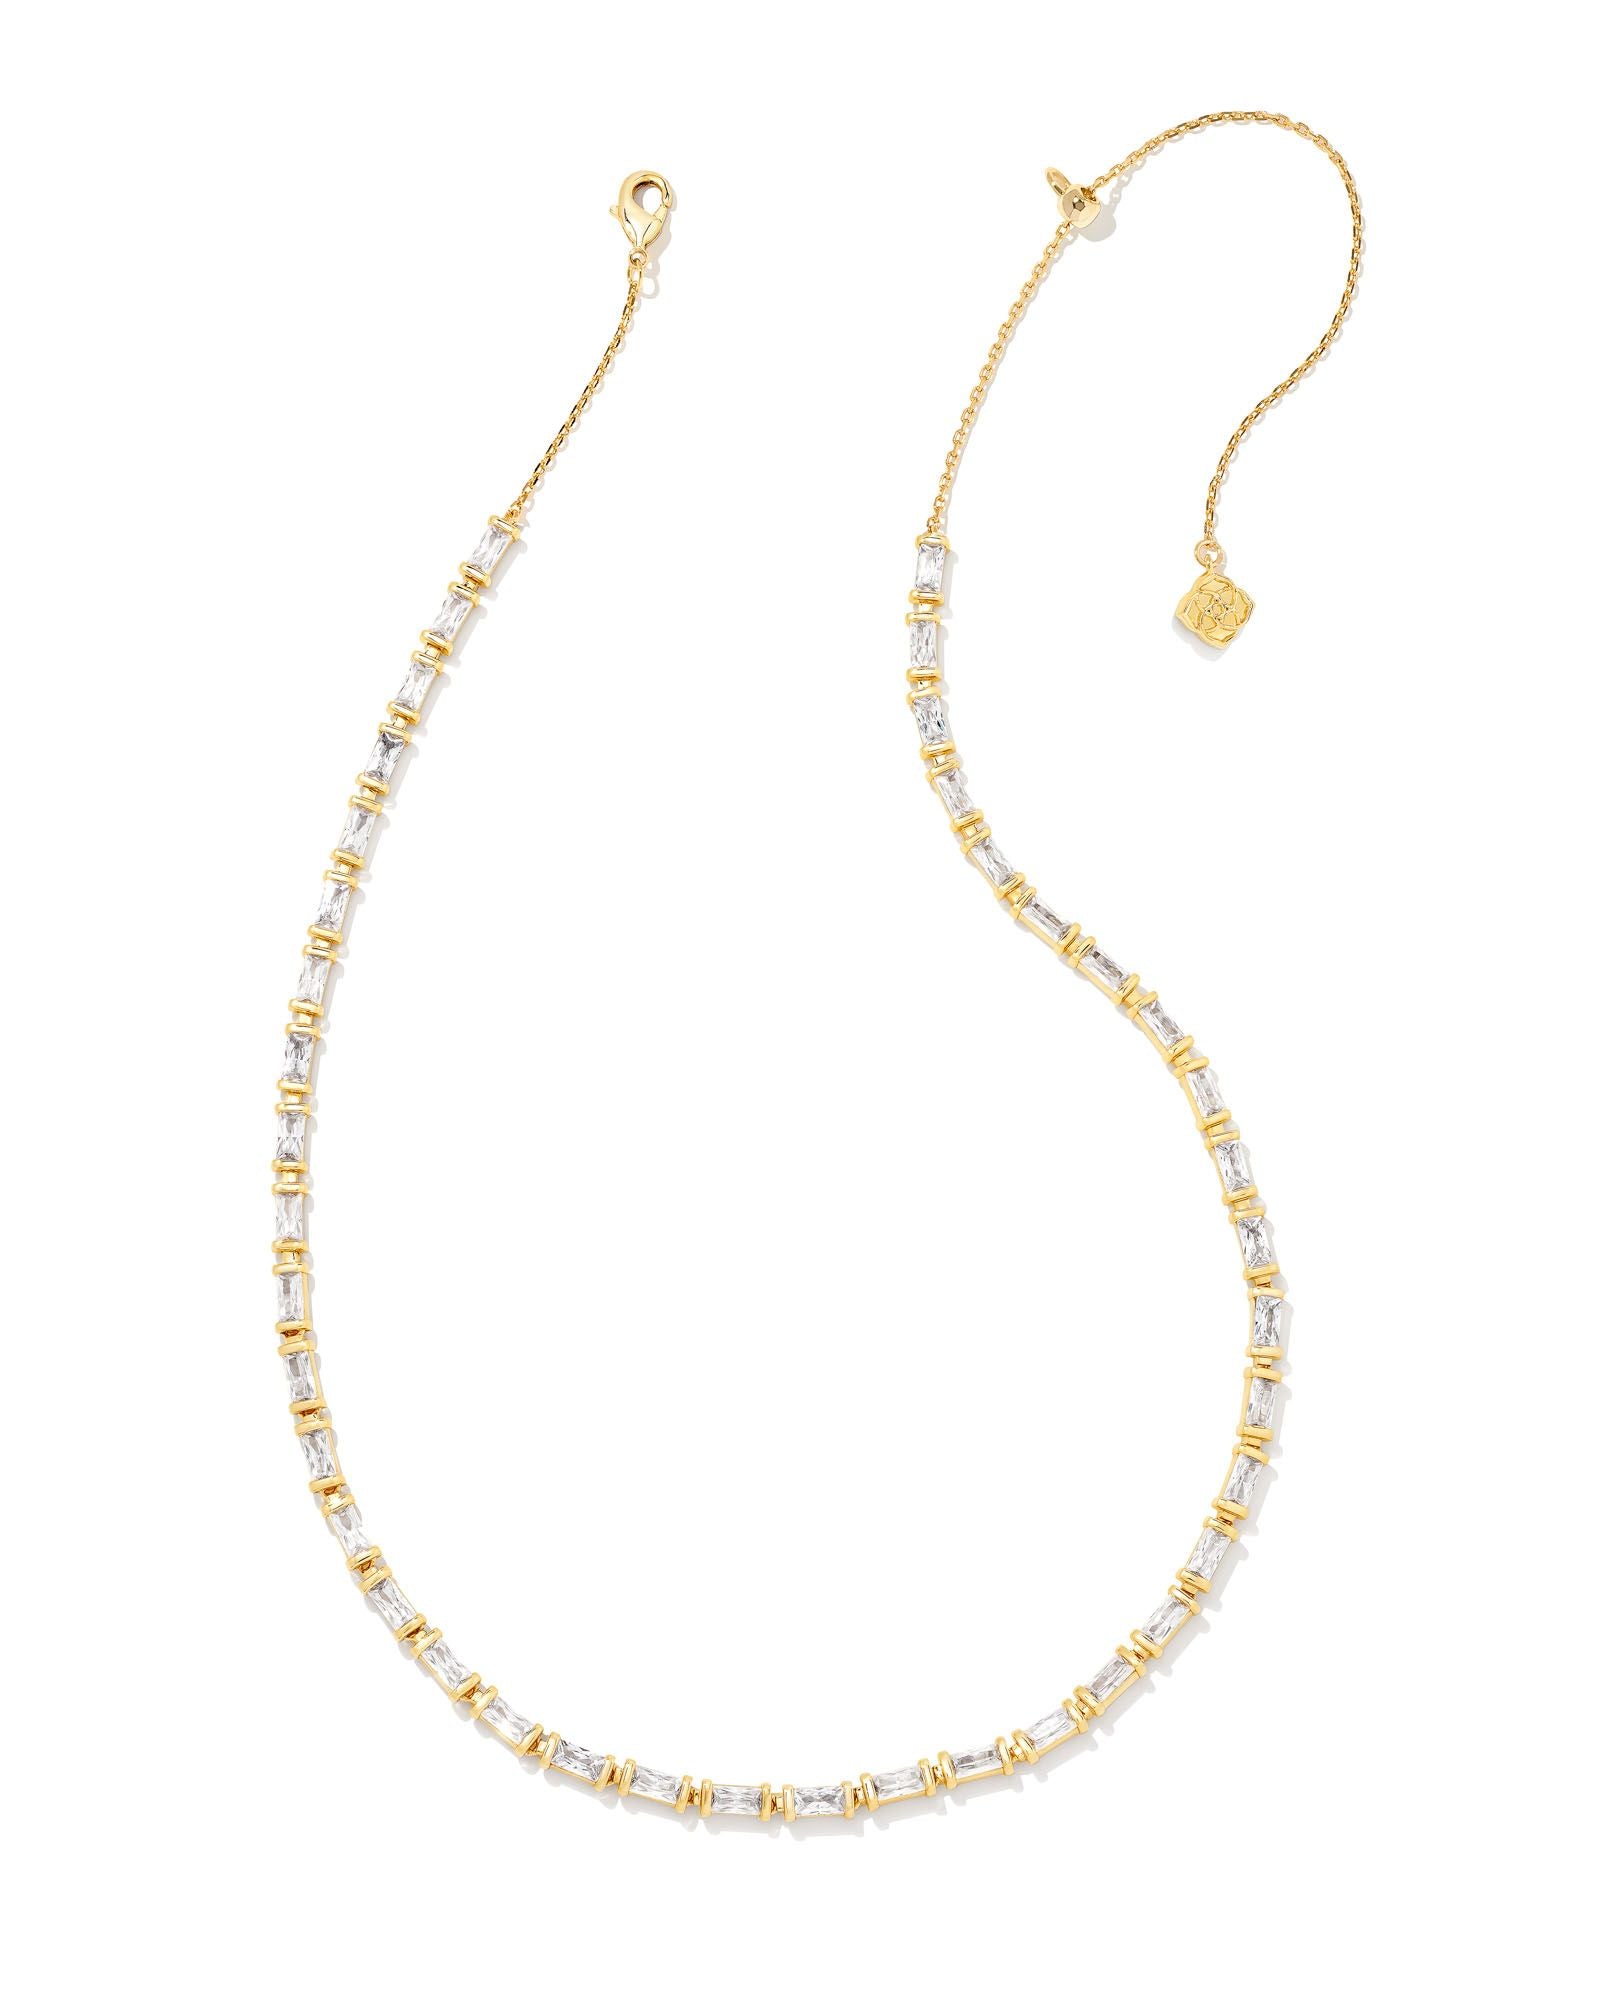 Juliette Strand Necklace in Gold White Crystal